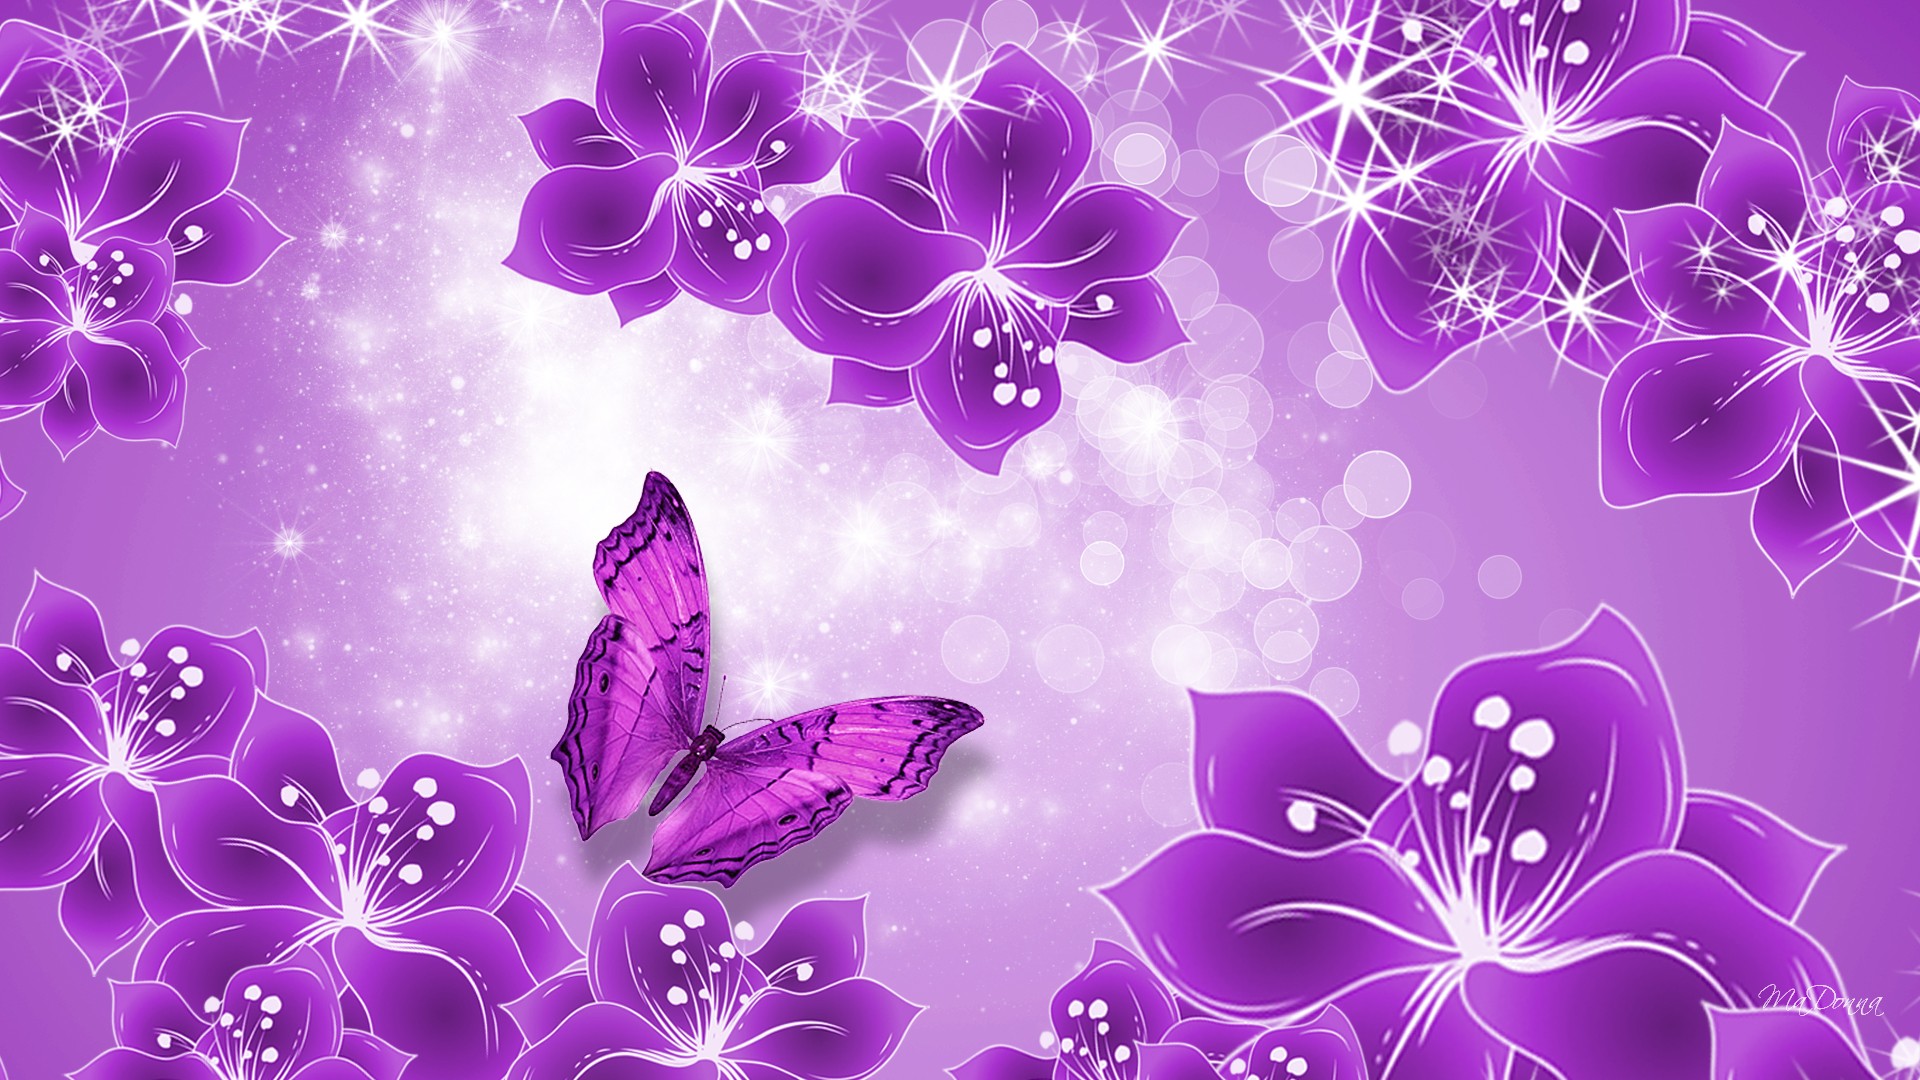 And Black Butterfly Wallpaper What Amazing Purple